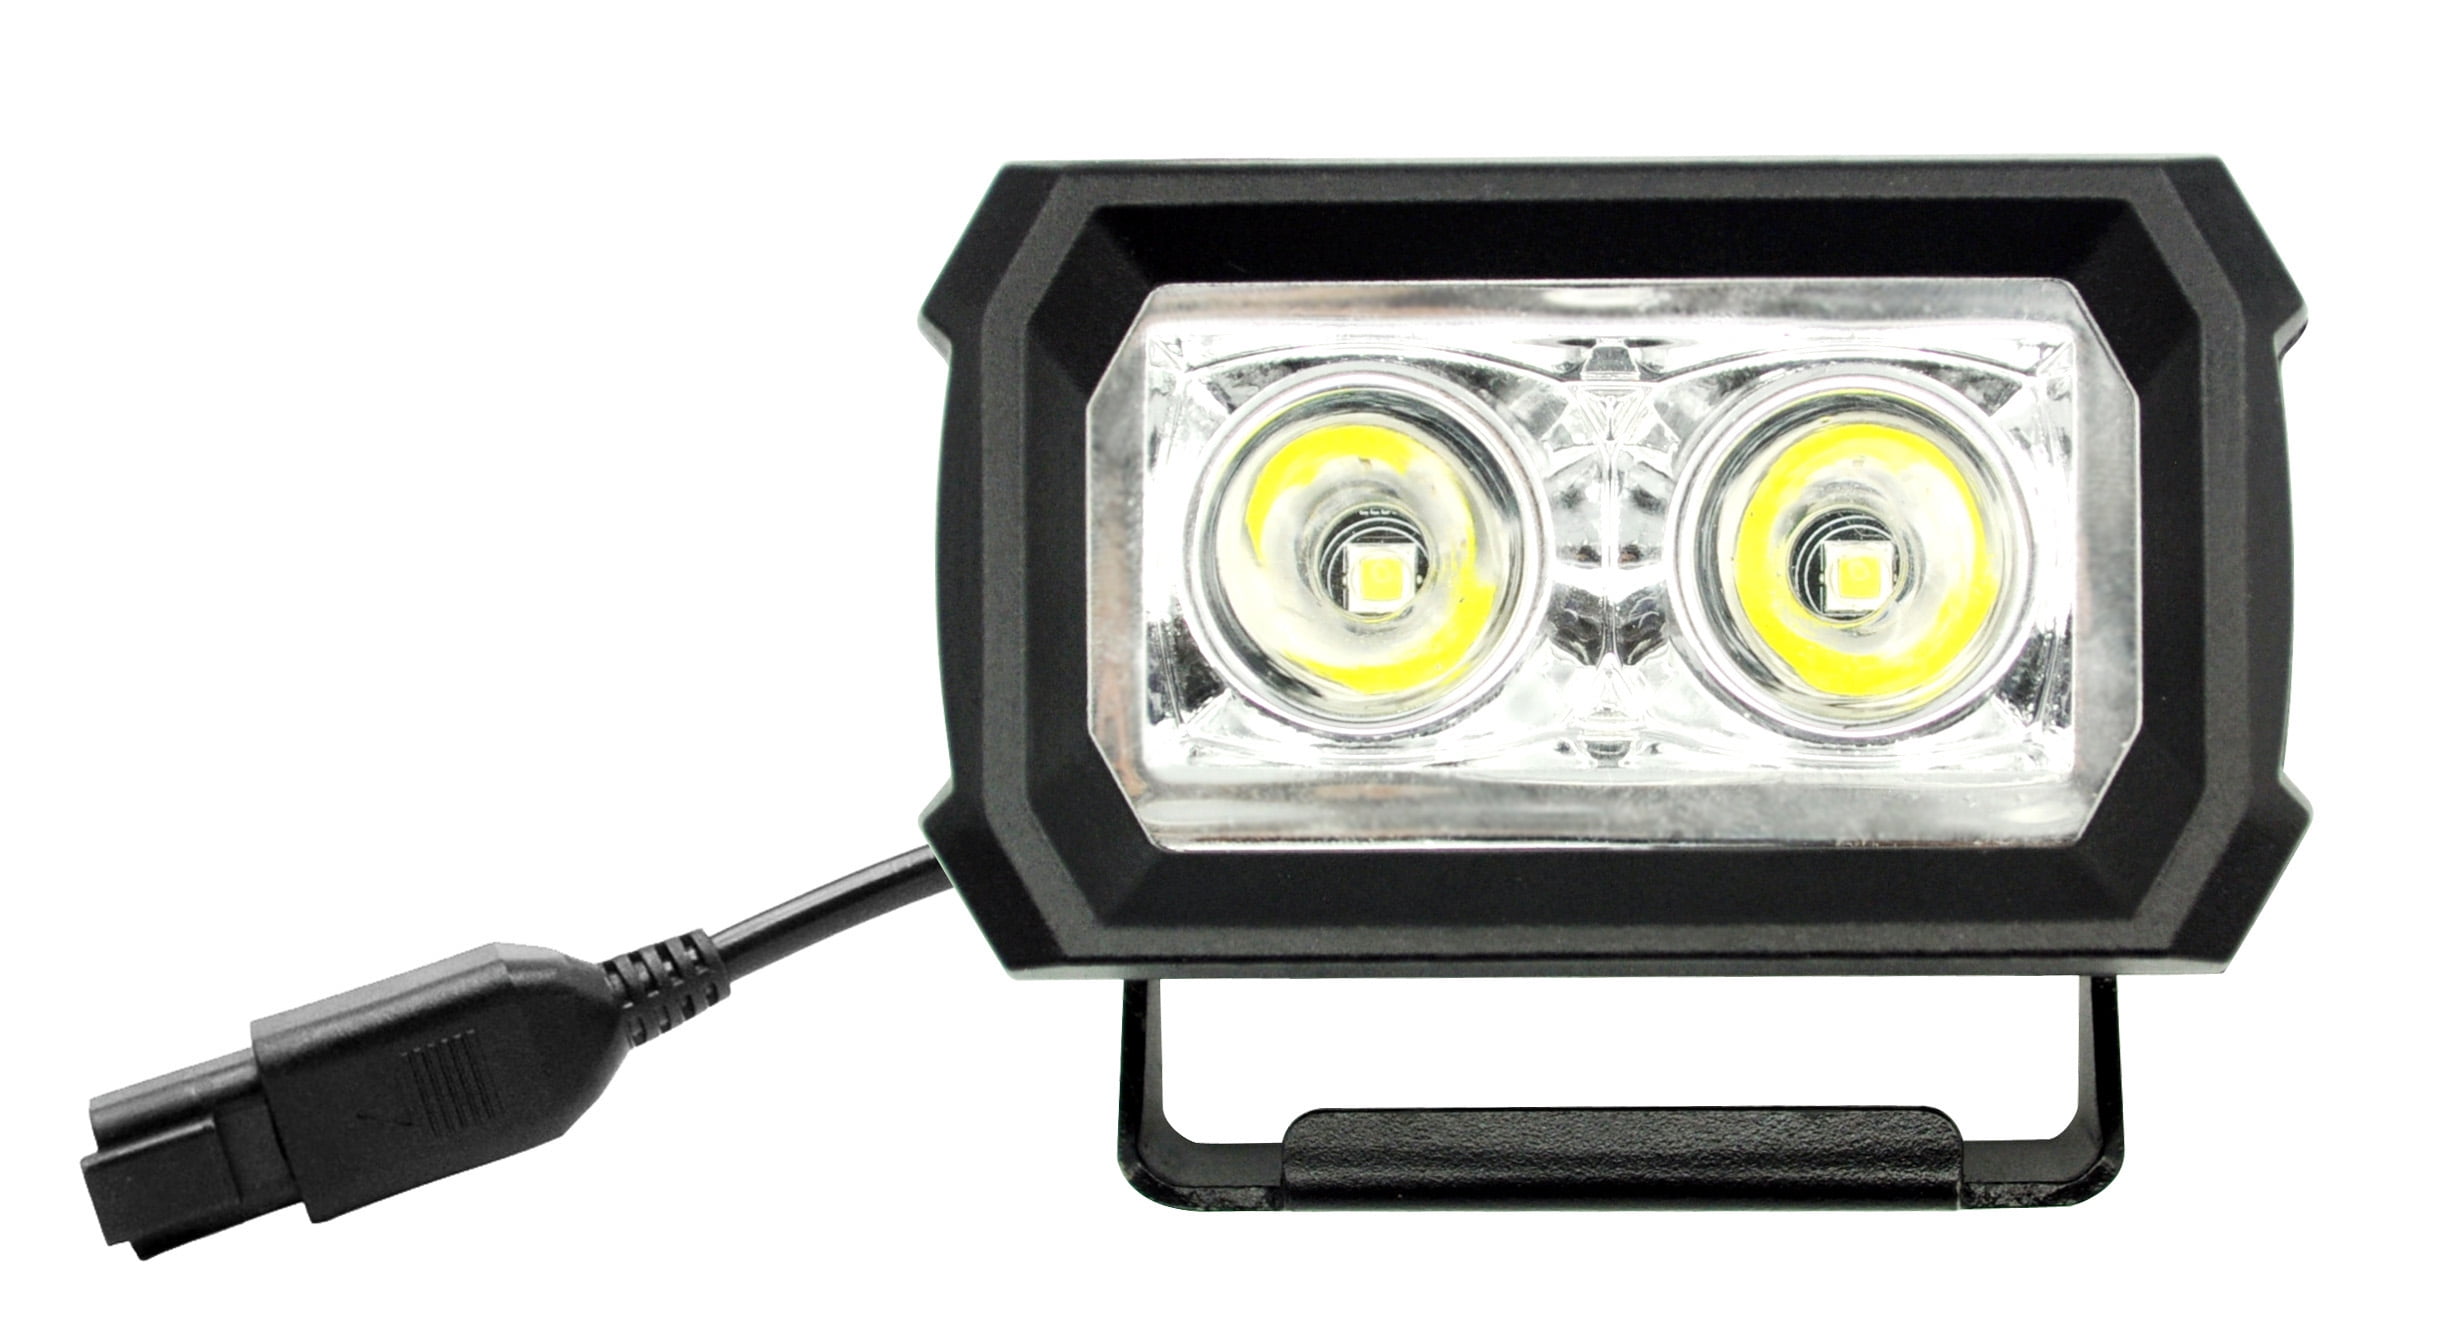 EVERGEAR 4 Inch Waterproof IP68 LED Spot Work Light For Jeep SUV Boat -